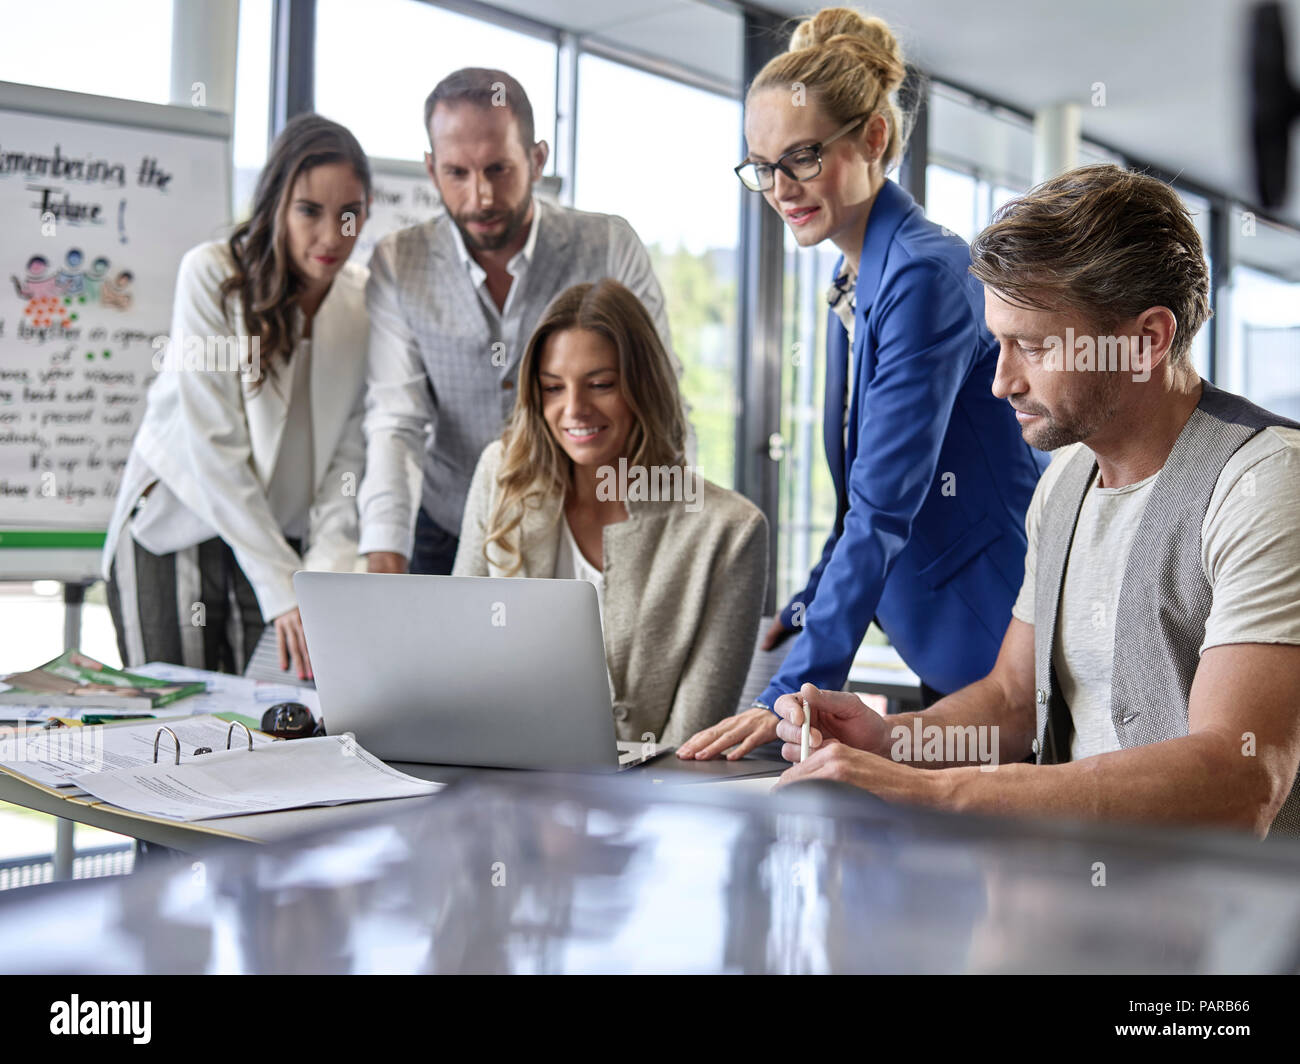 Business people having a workshop sharing laptop Stock Photo